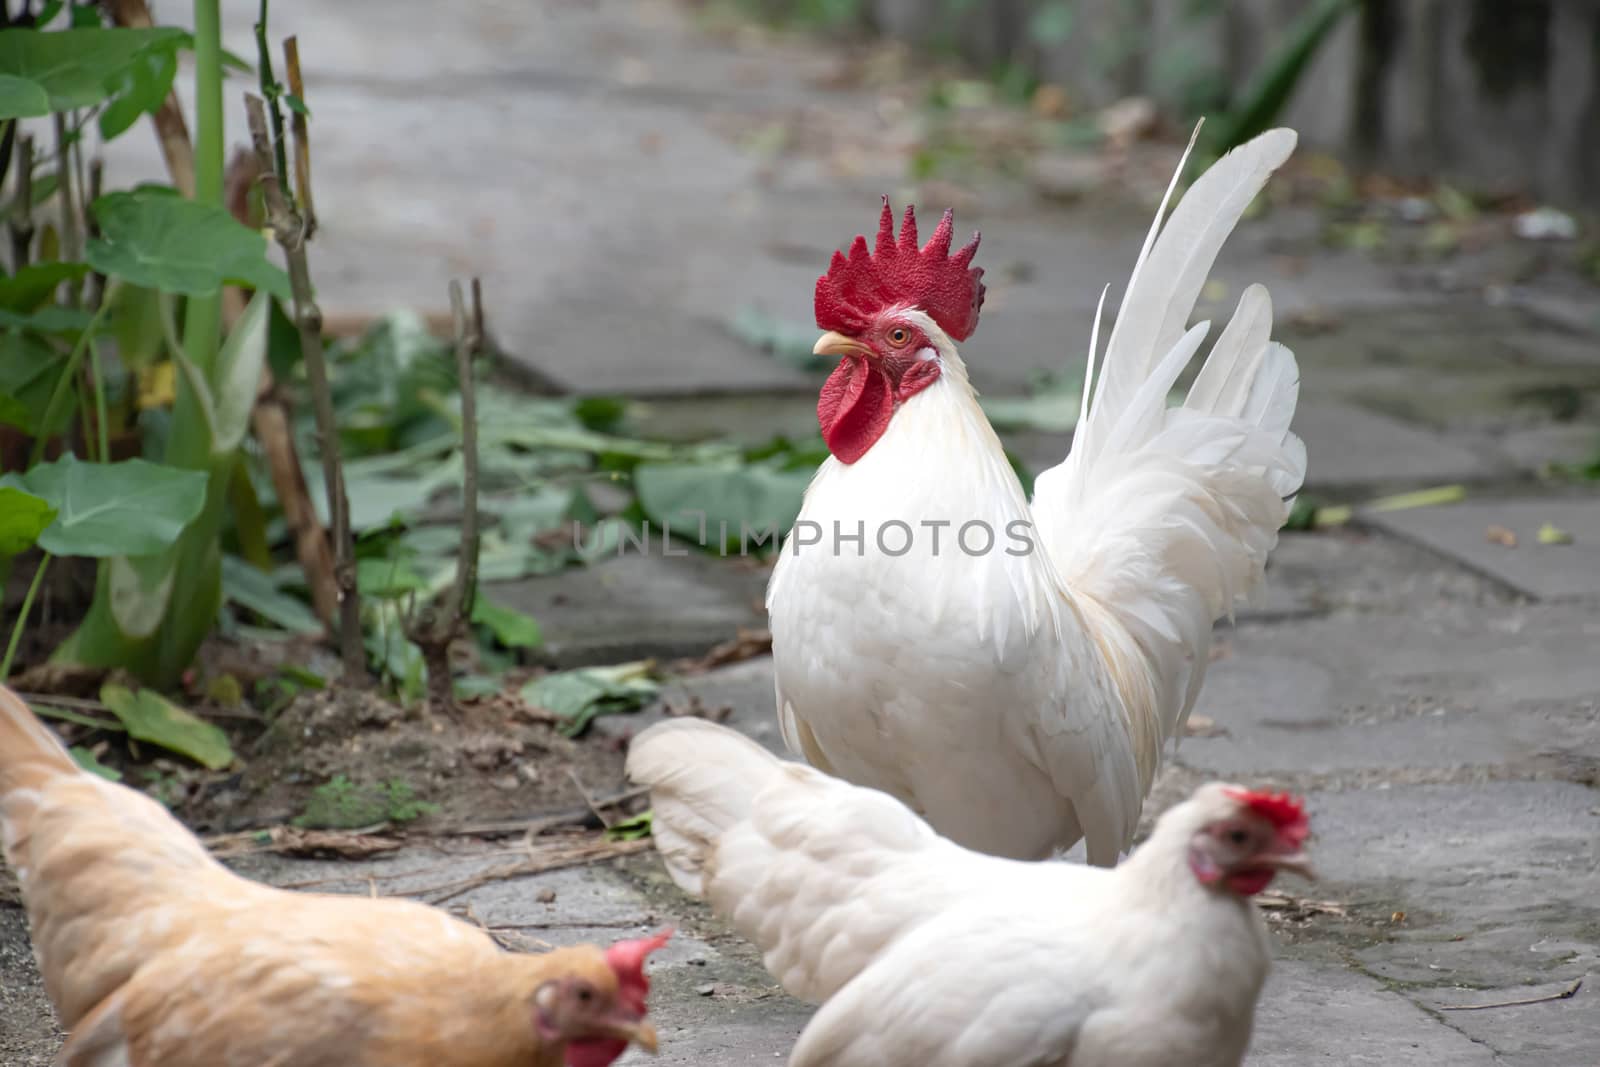 bantam chickens walk freely in the backyard, a new normal lifestyle